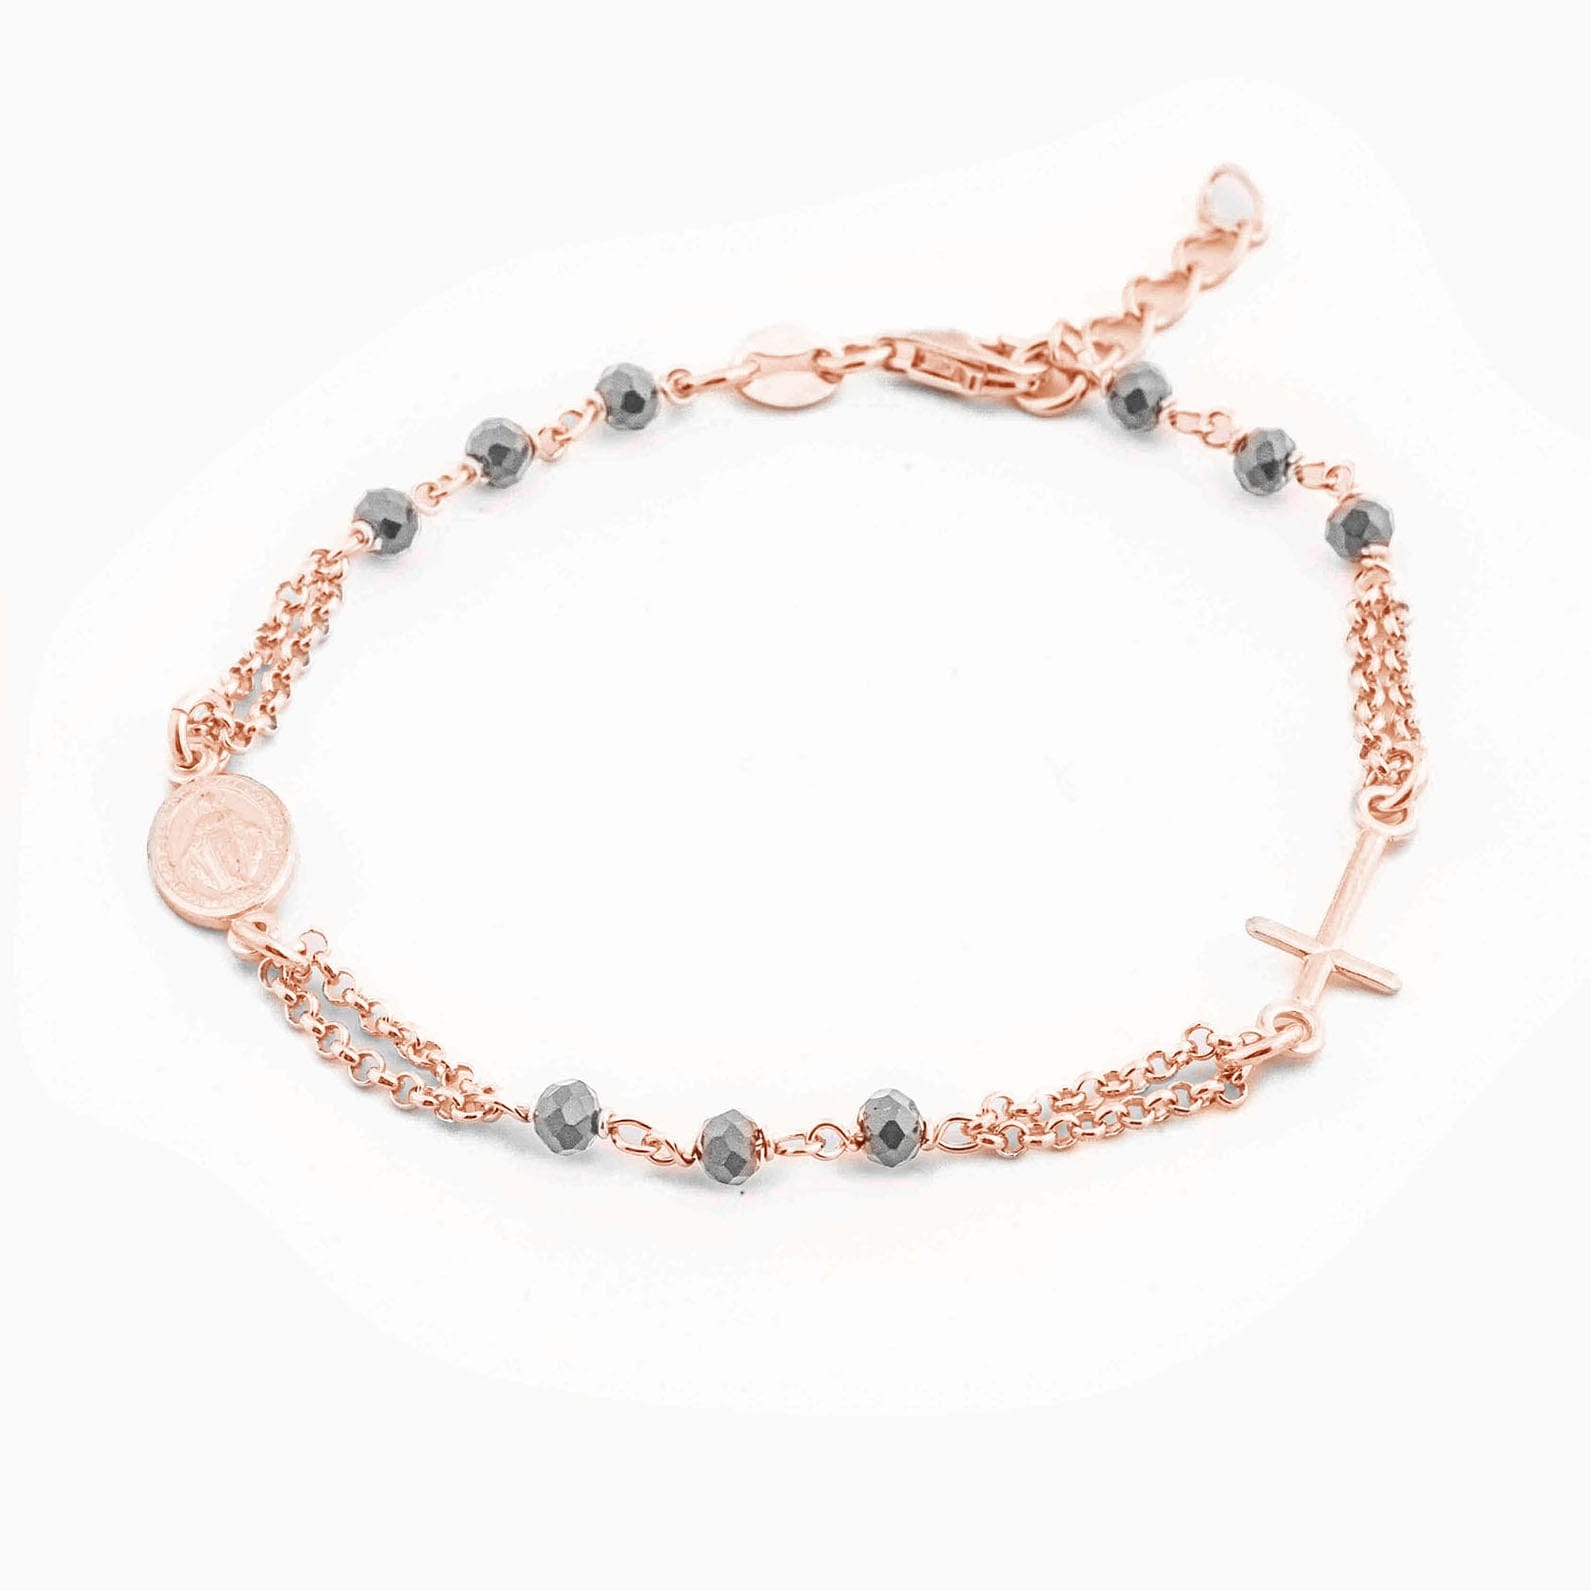 MONDO CATTOLICO Prayer Beads Rose Gold / Cm 17.5 (6.9 in) / Cm 3 (1.2 in) STERLING SILVER ROSARY BRACELET DOUBLE CHAIN GREY FACETED BEADS